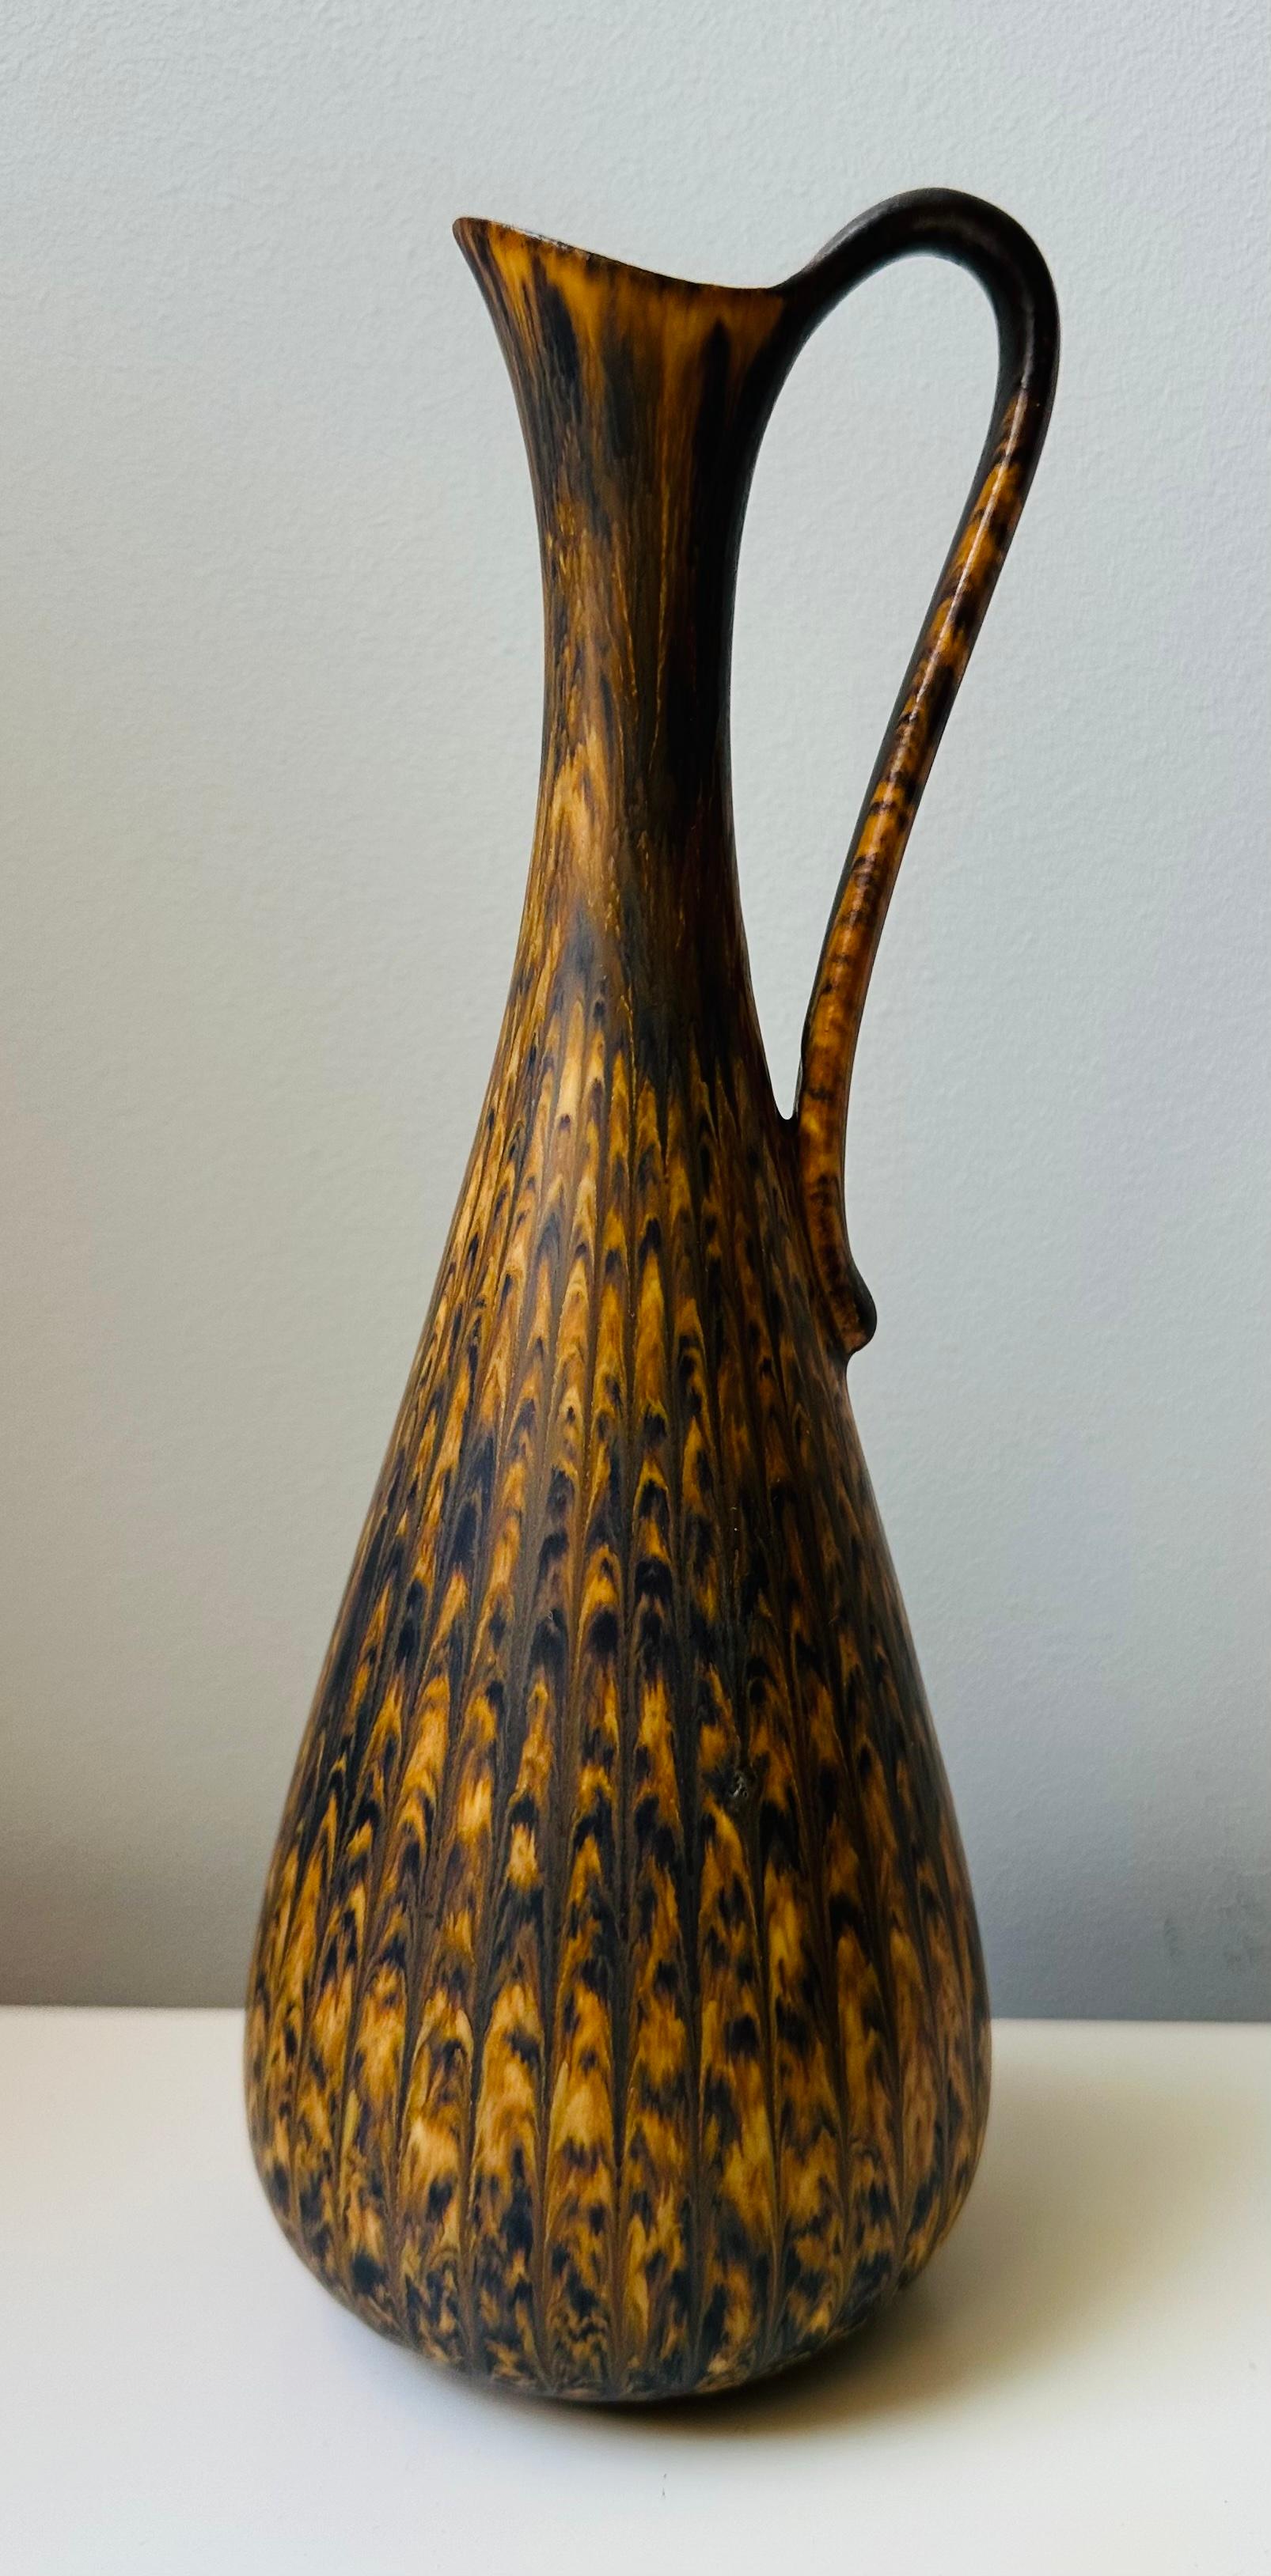 A beautifully marbled 1950s Swedish handle-jug designed by Gunner Nylund for the Rörstrand Factory.  The pottery, stoneware jug features a wonderful smooth glaze in marble effect tones of browns and golden-brown colours.  Inscribed on the base: 